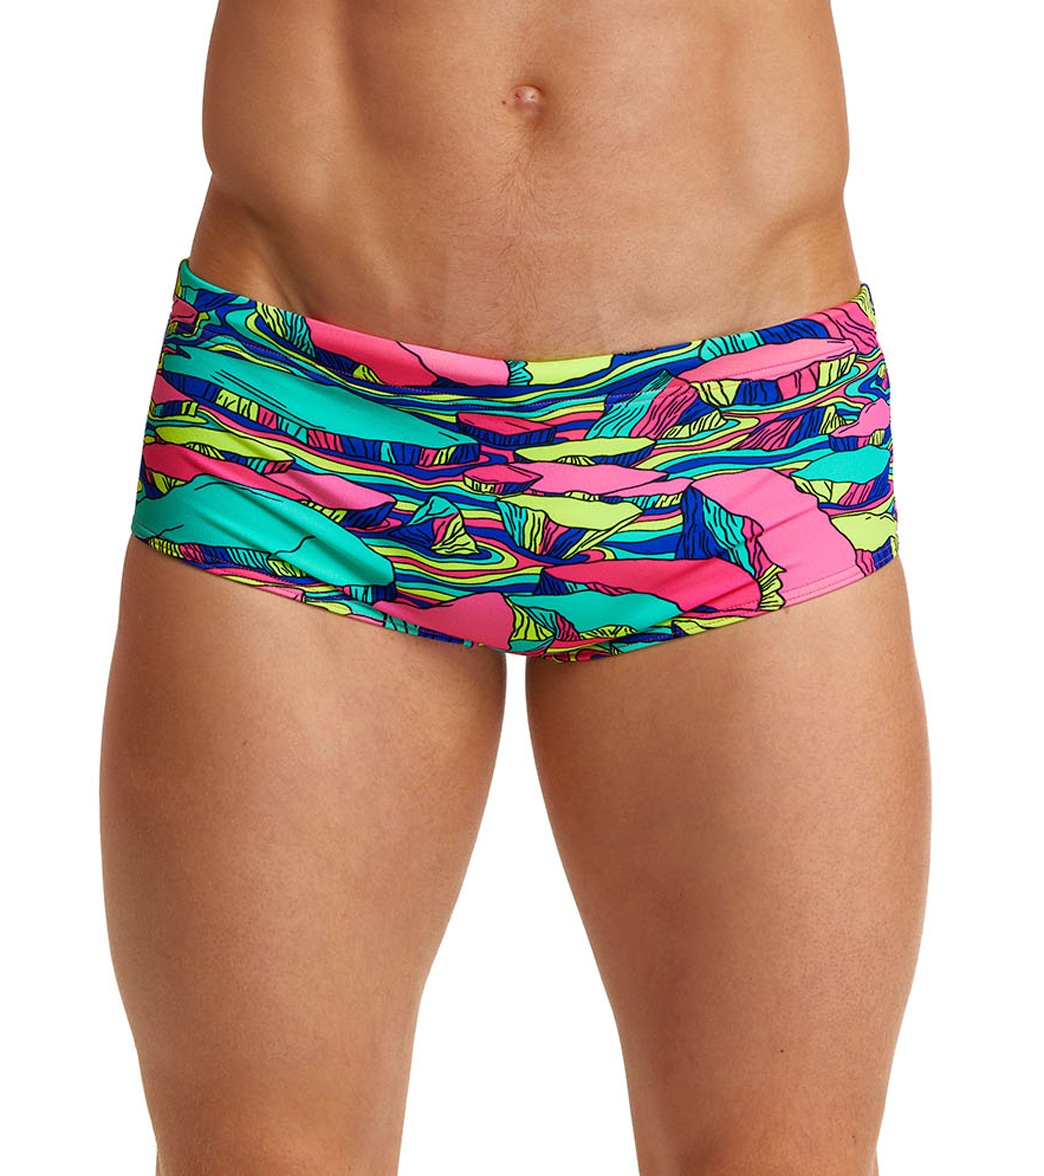 Funky Trunks Men's Bright Bergs Sidewinder Trunk Square Leg Swimsuit - 30 Polyester - Swimoutlet.com